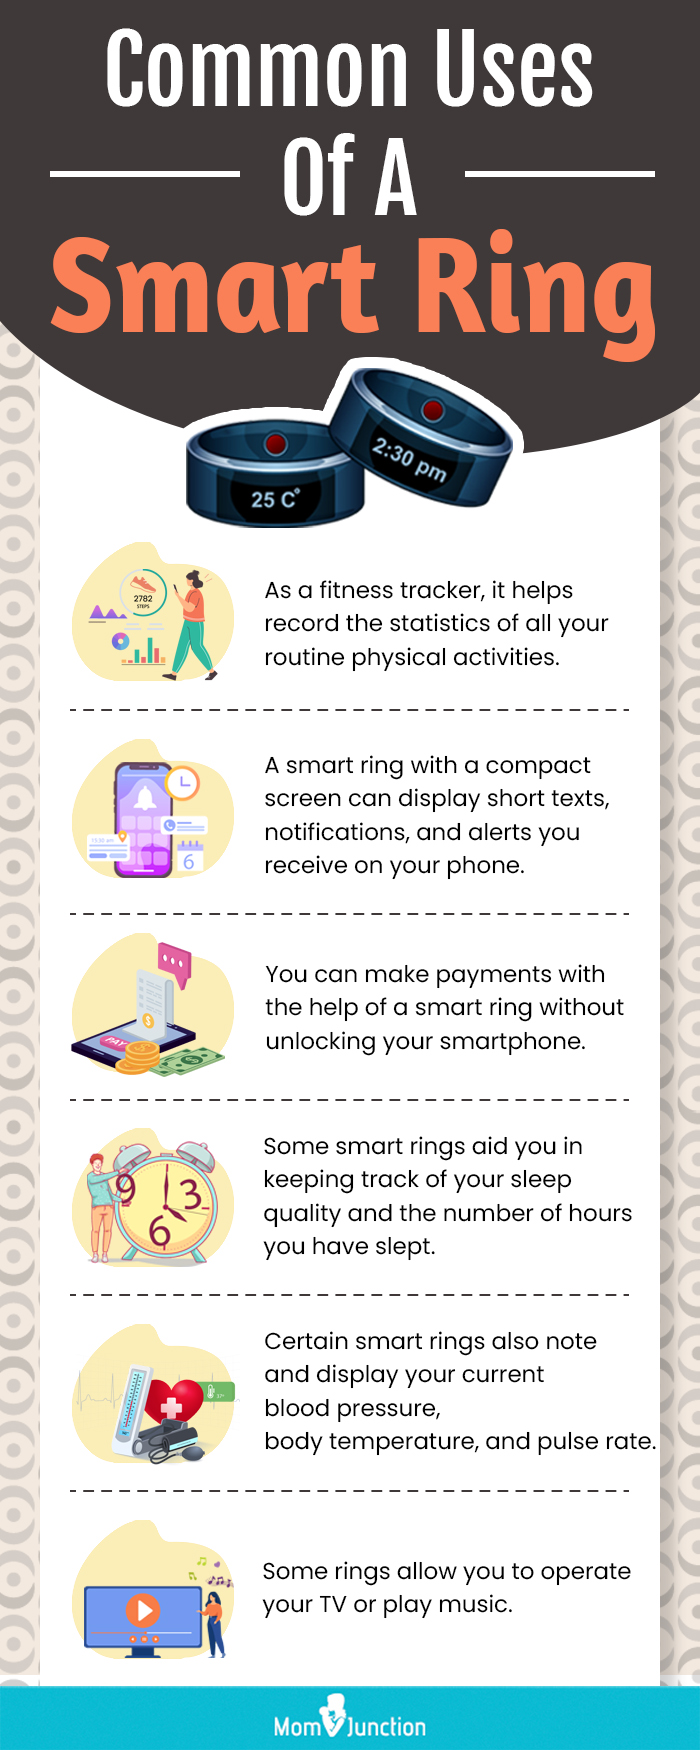 Common Uses Of A Smart Ring